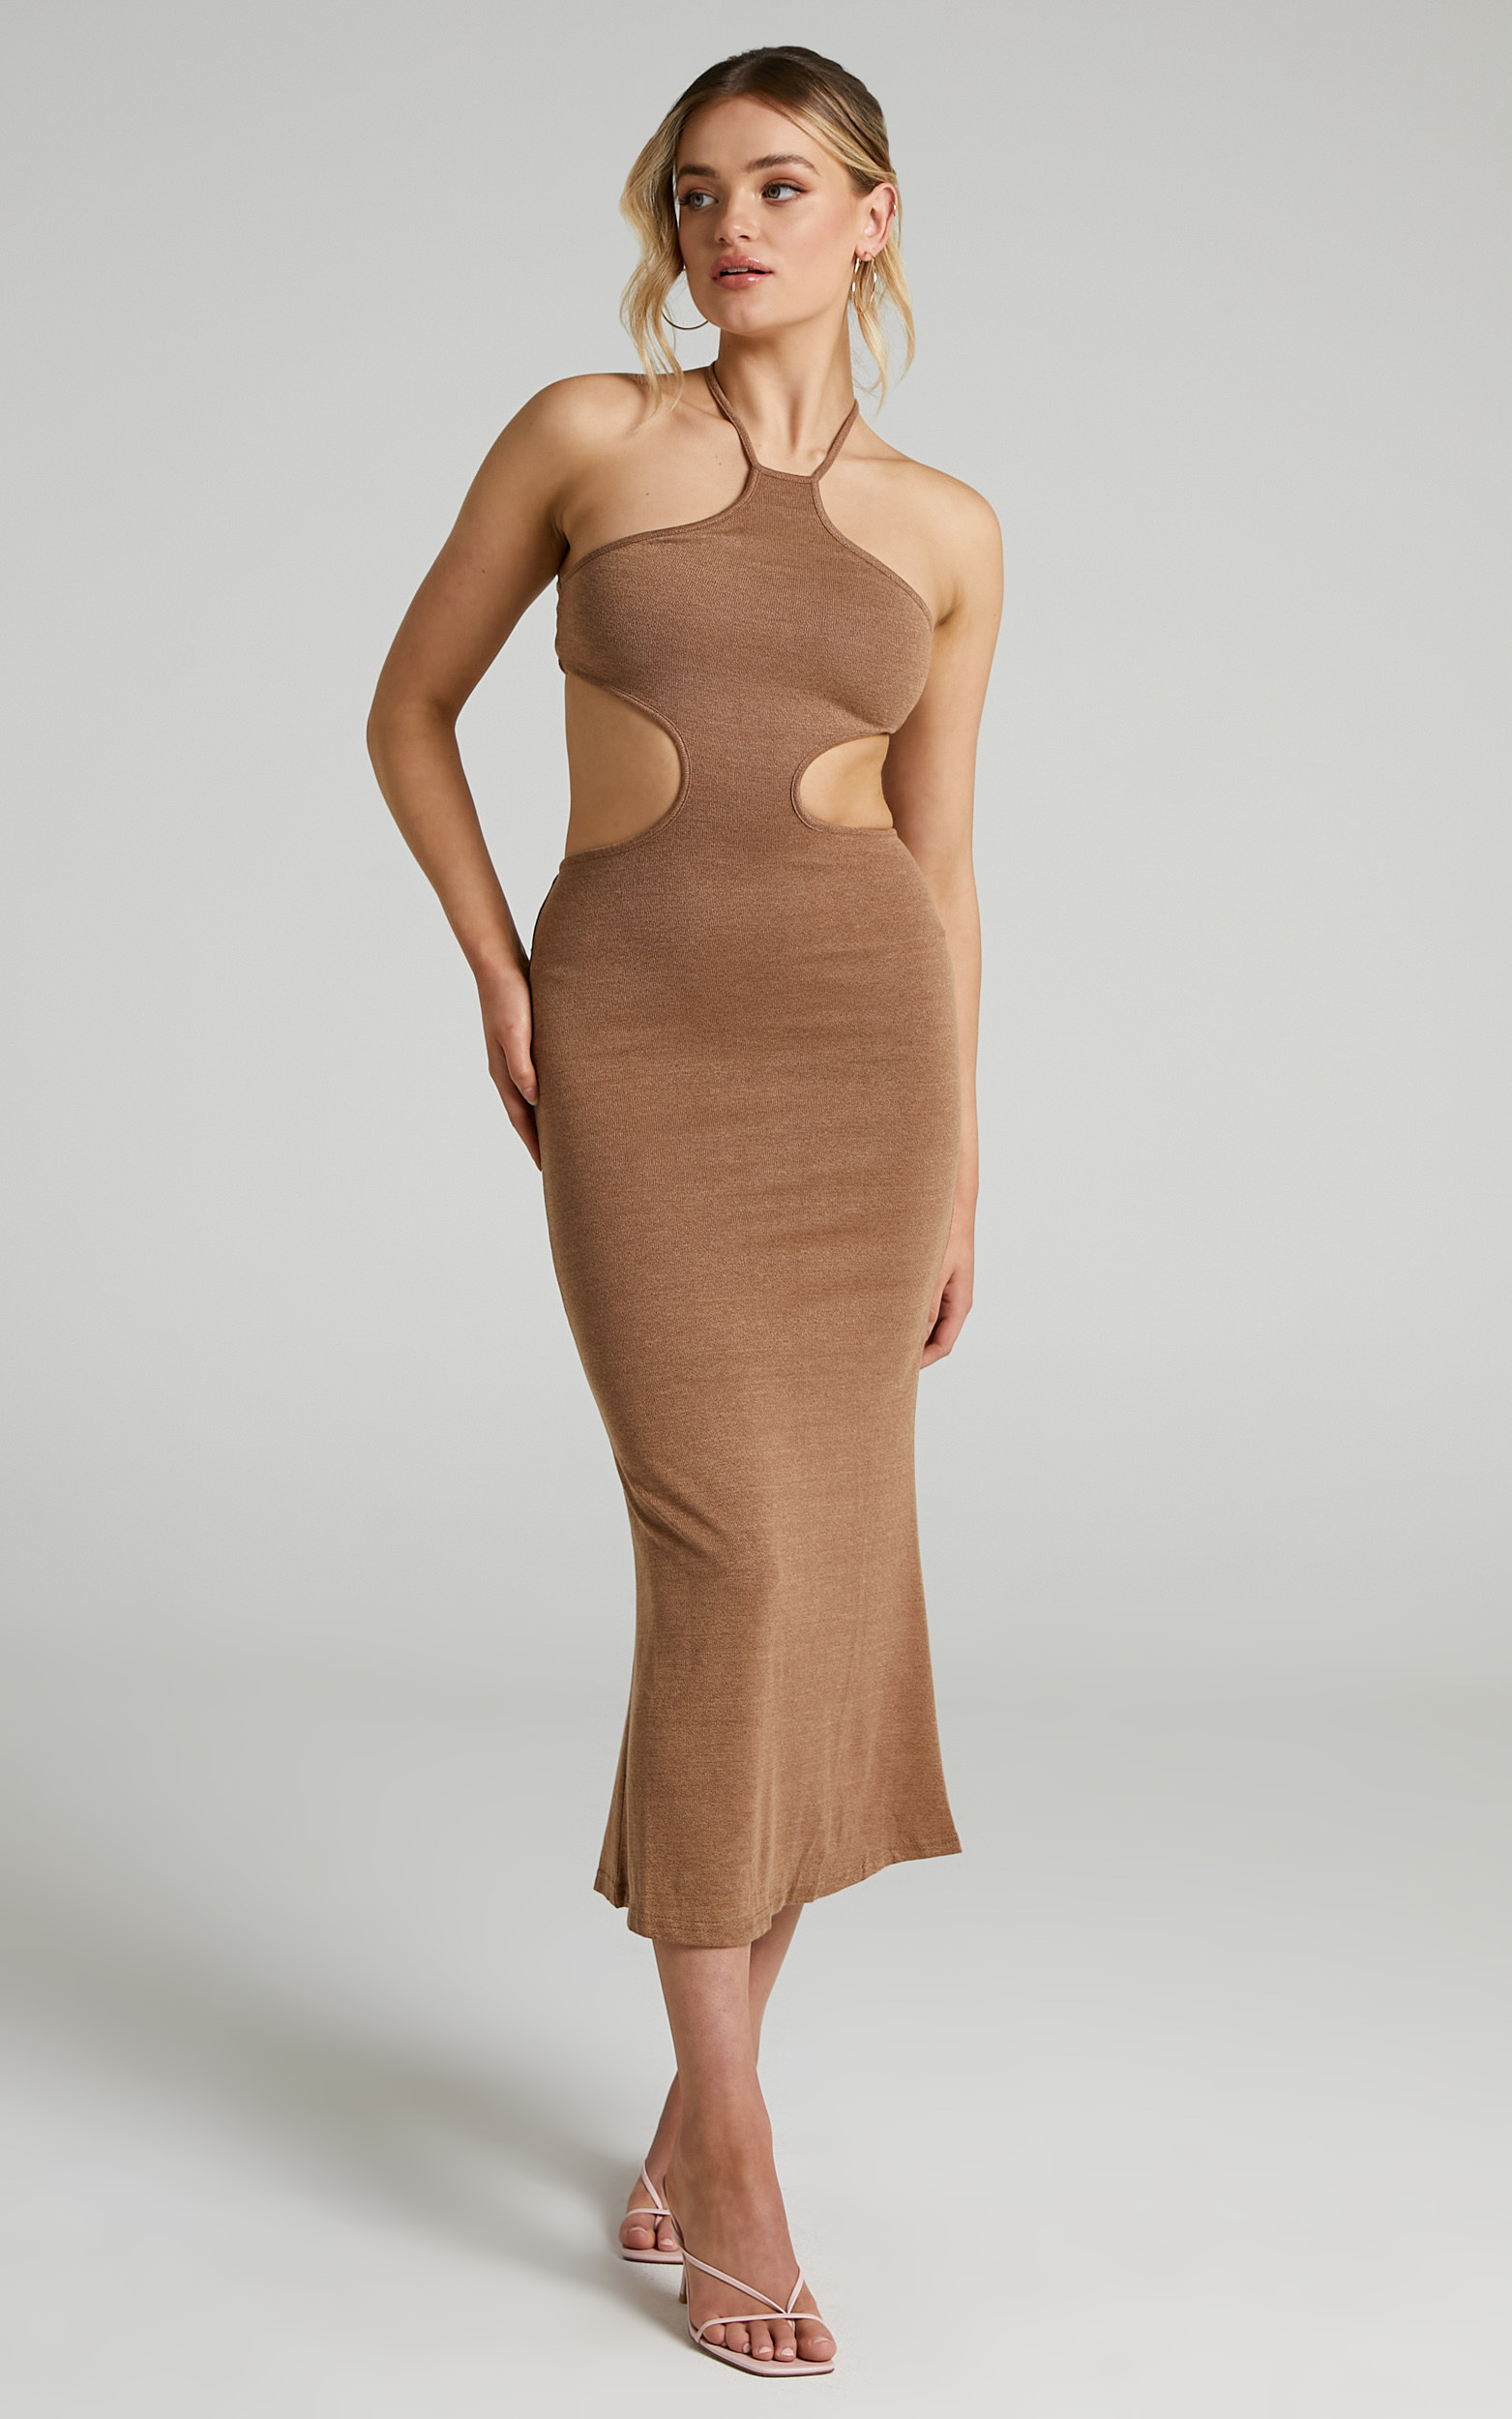 Saskia Side Cut Out Midi Dress in Chocolate - 06, BRN1, hi-res image number null